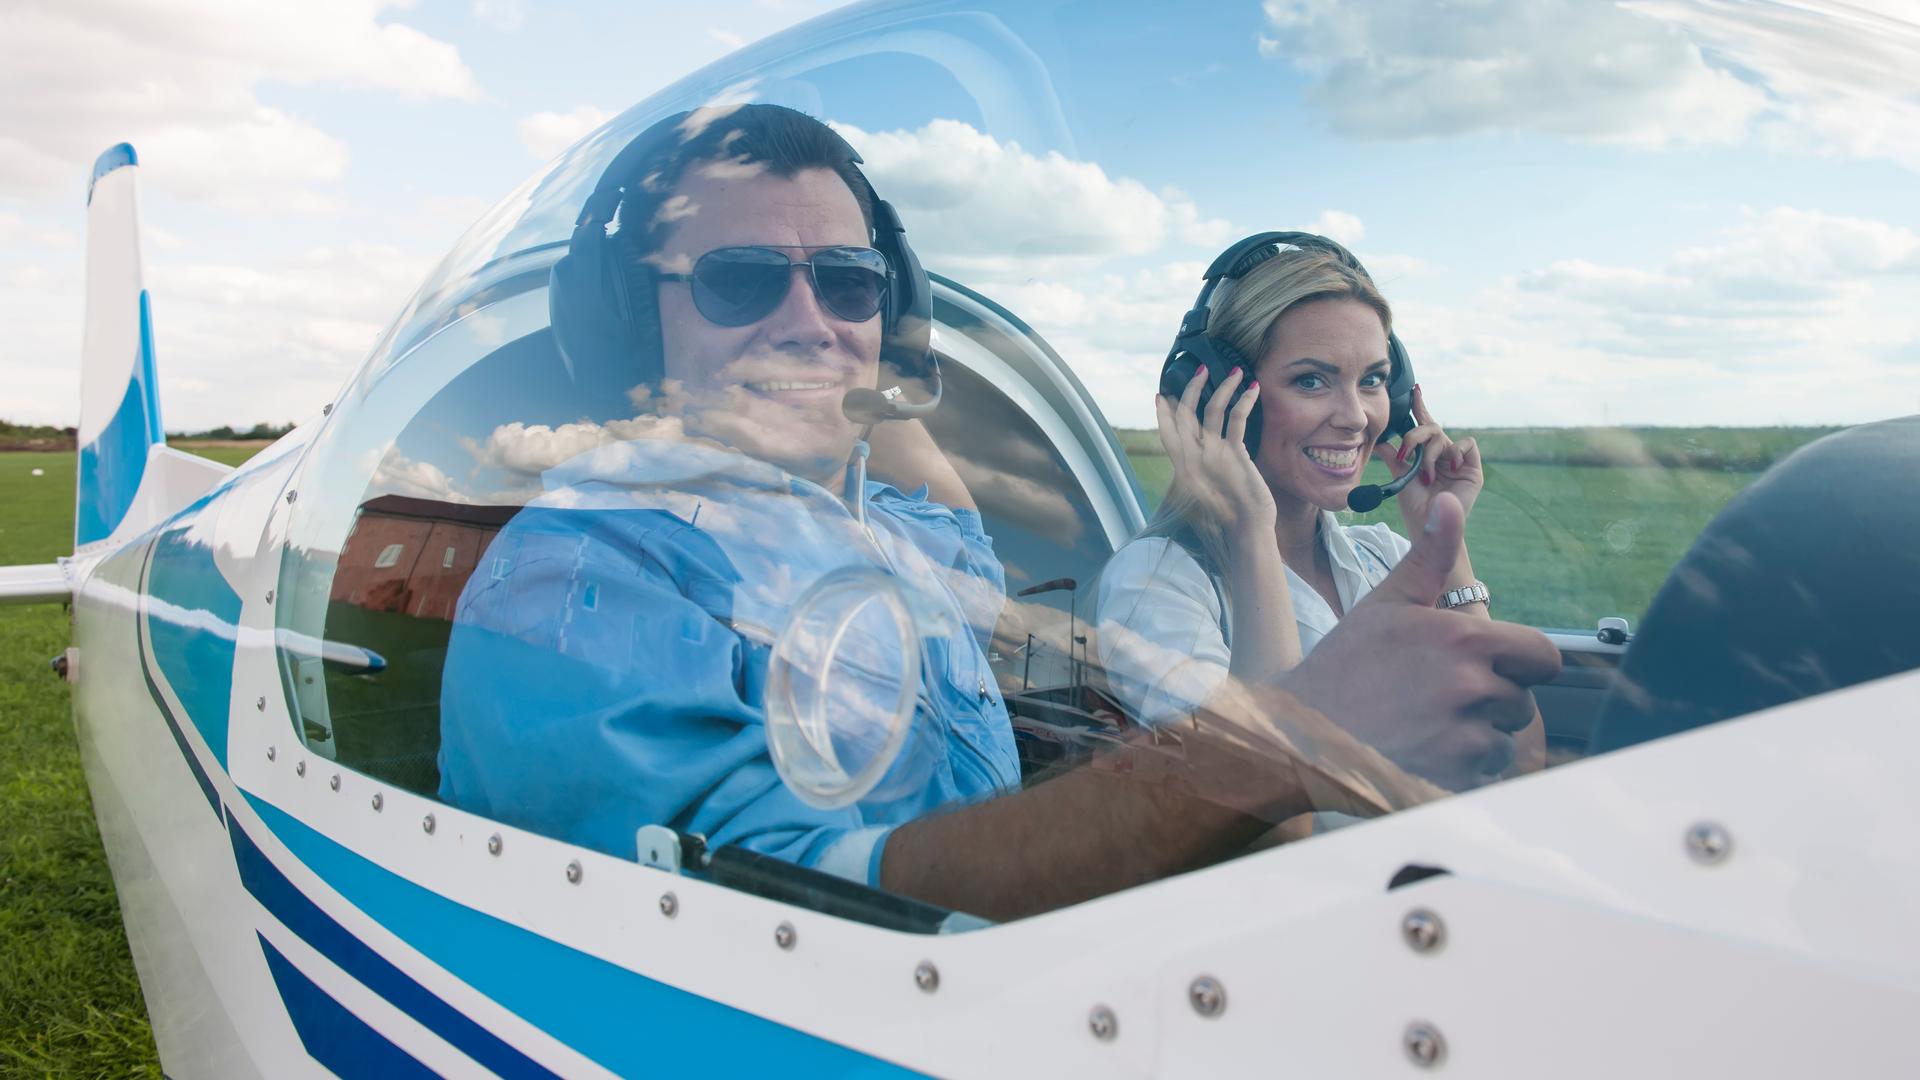 A smiling couple sits inside an airplane before takeoff